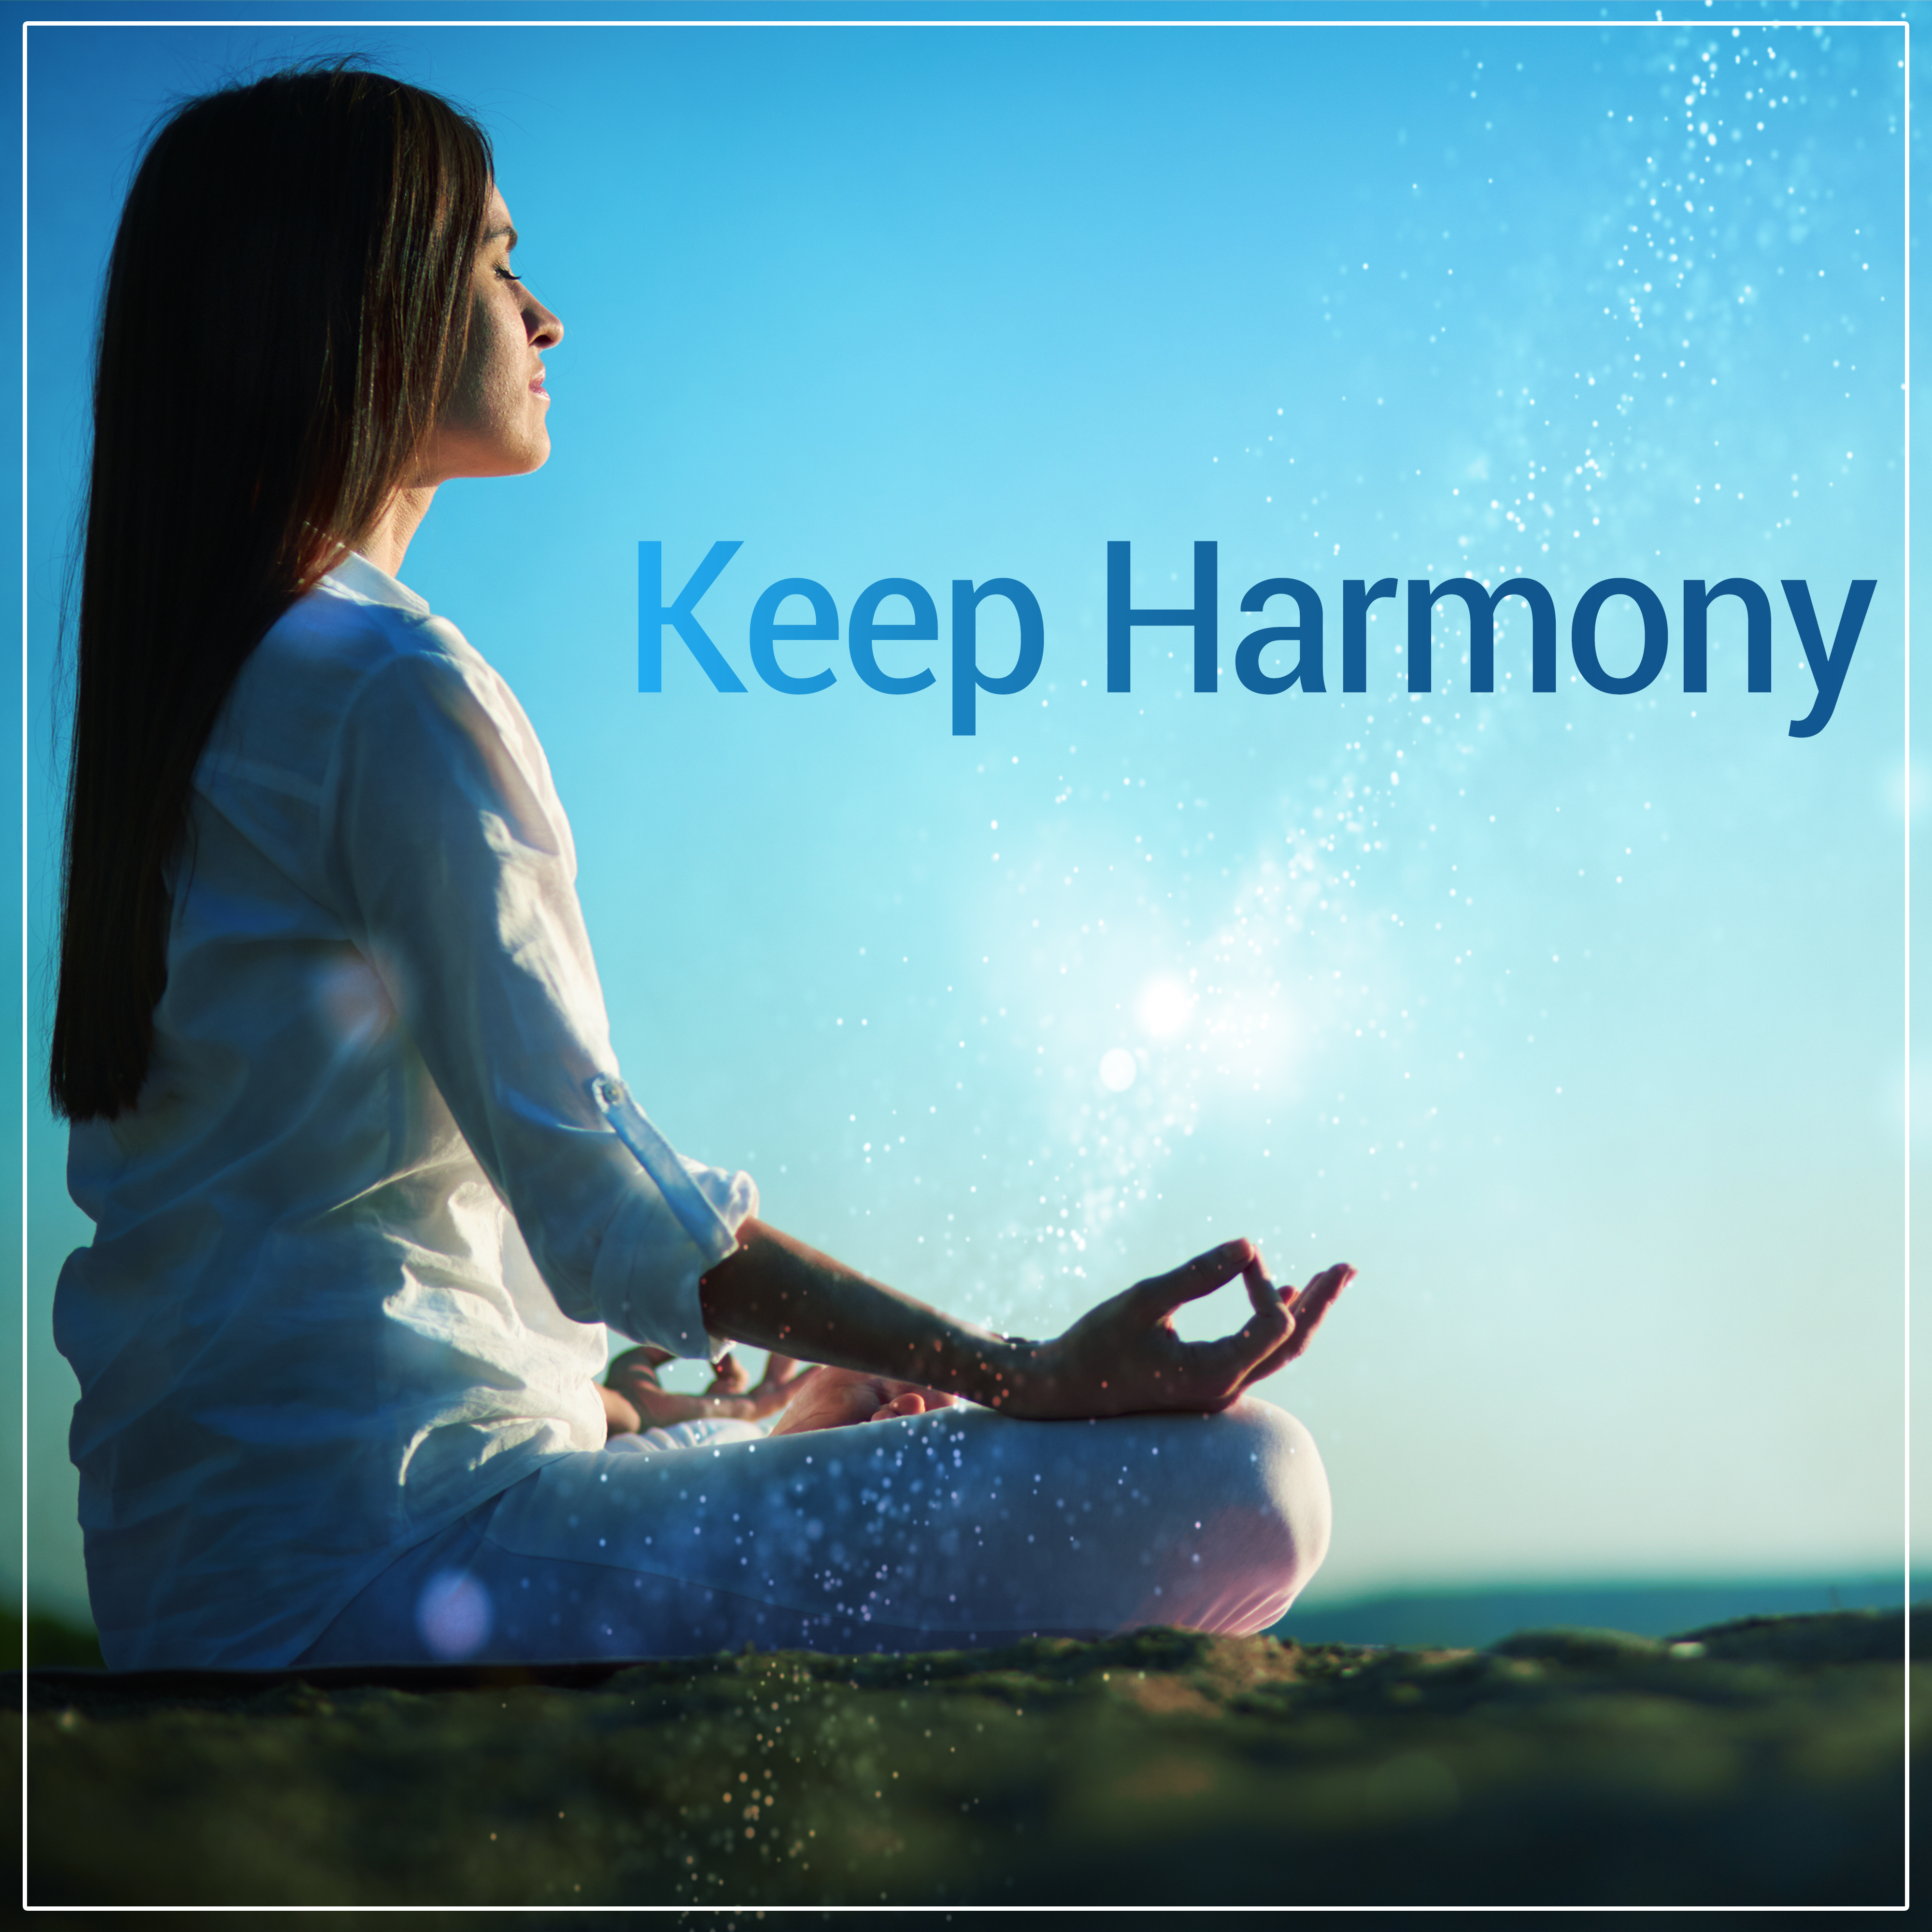 Keep Harmony - Focus Meditation, Sounds of Asia, Balance Body and Mind, Rest and Restart